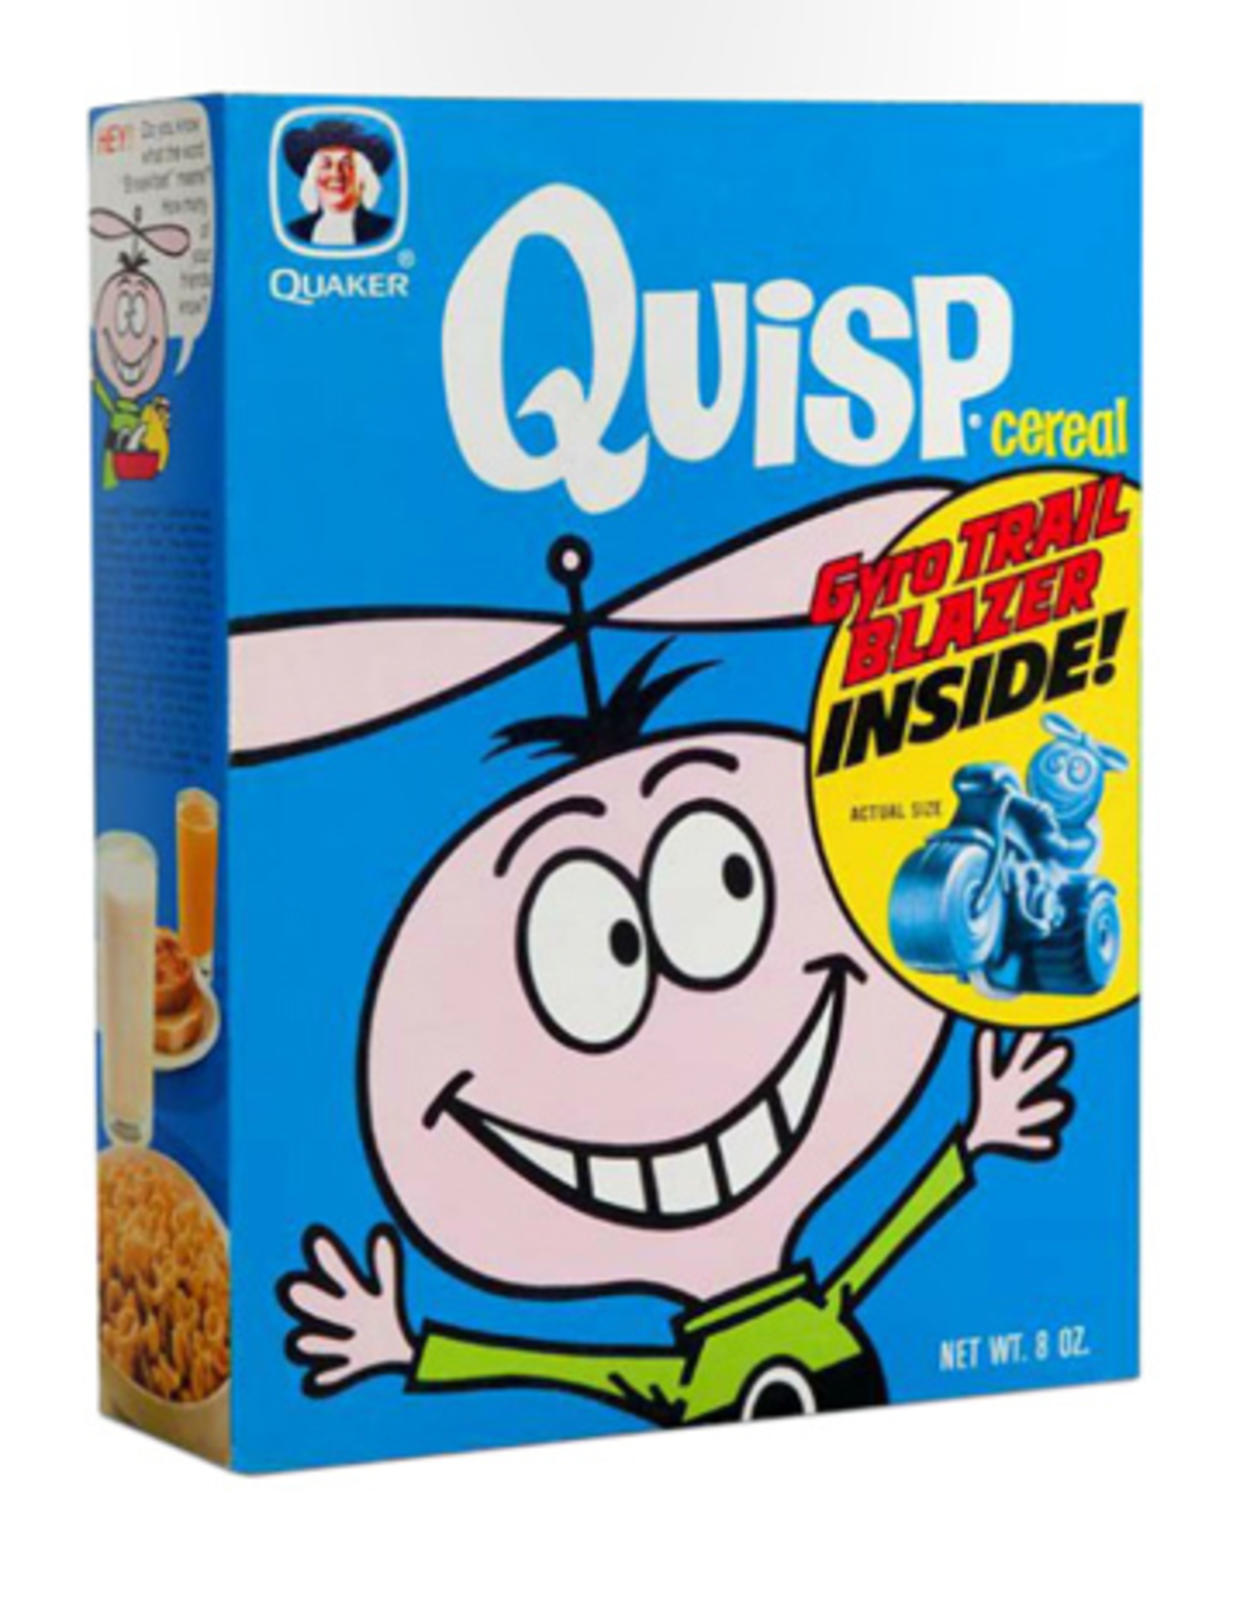 Breakfast Cereal Mascots Beloved And Bizarre